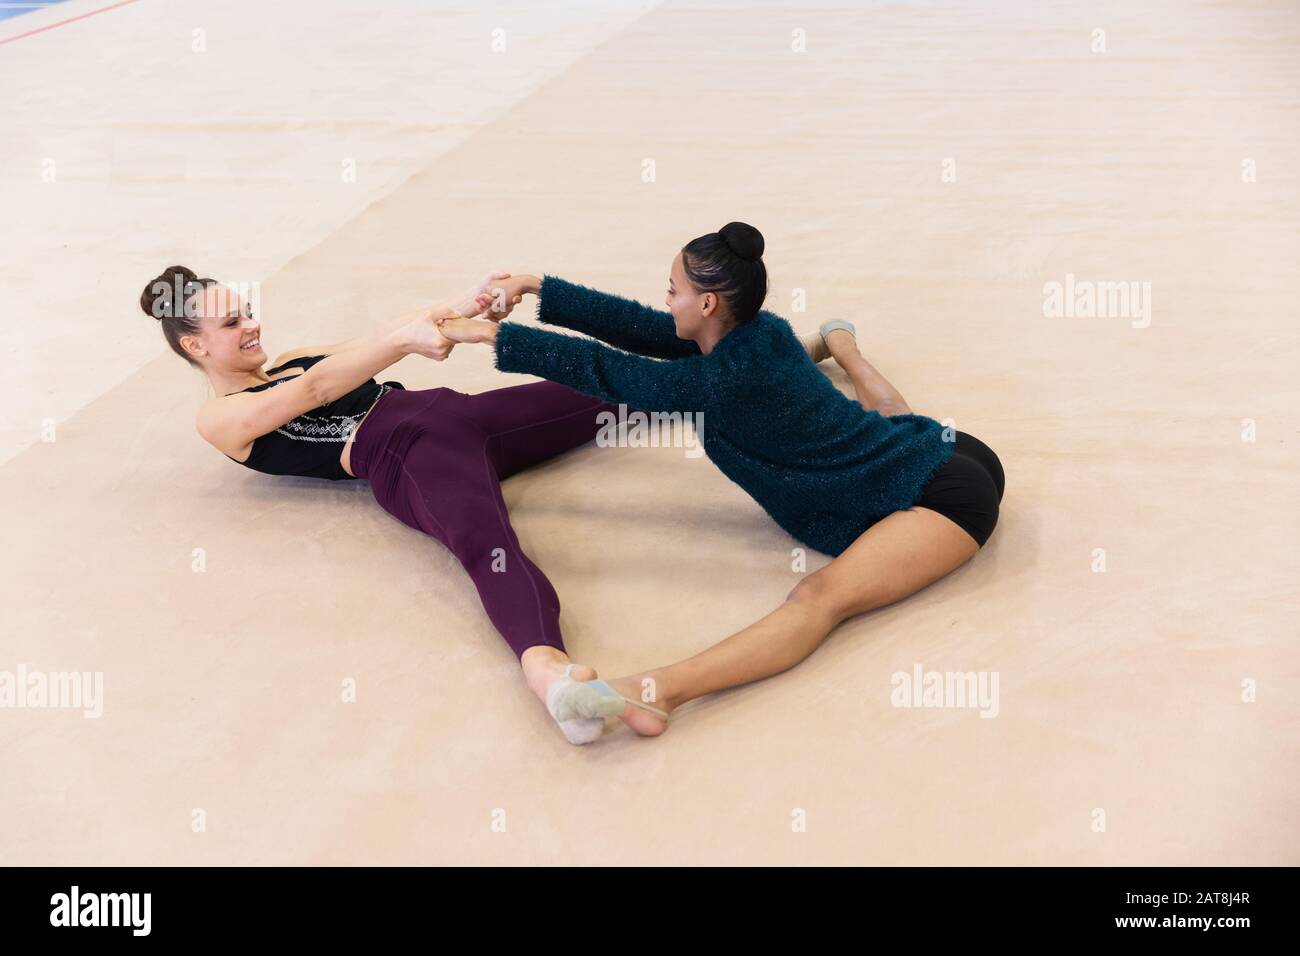 Gymnasts stretching at the gym Stock Photo